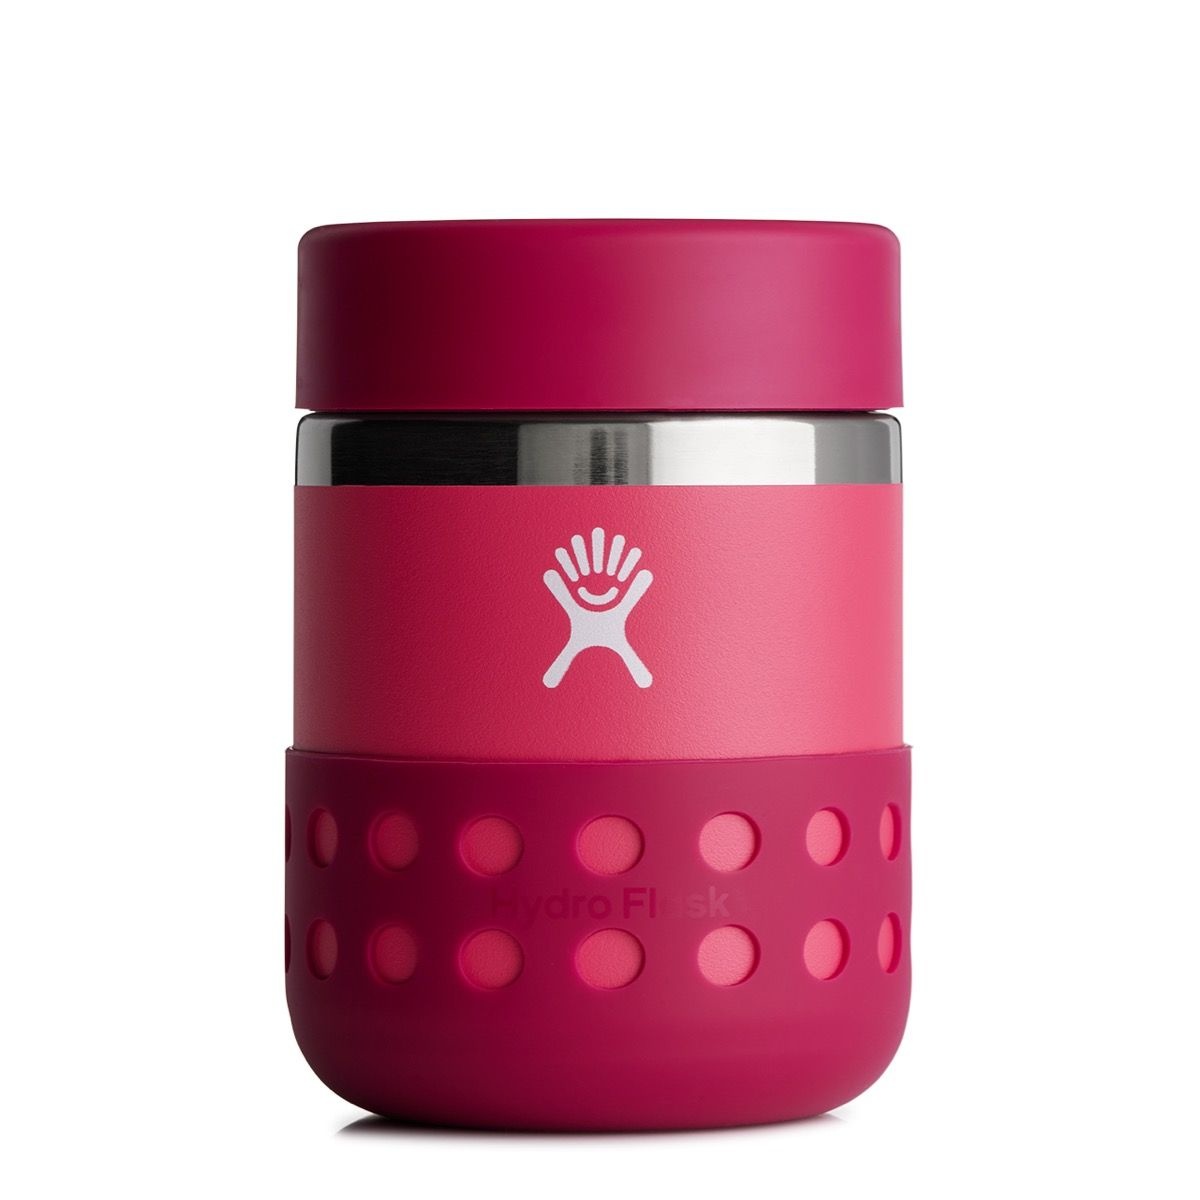 Crocodile Creek Food Jar, Insulated Red Robot – Little Red Hen